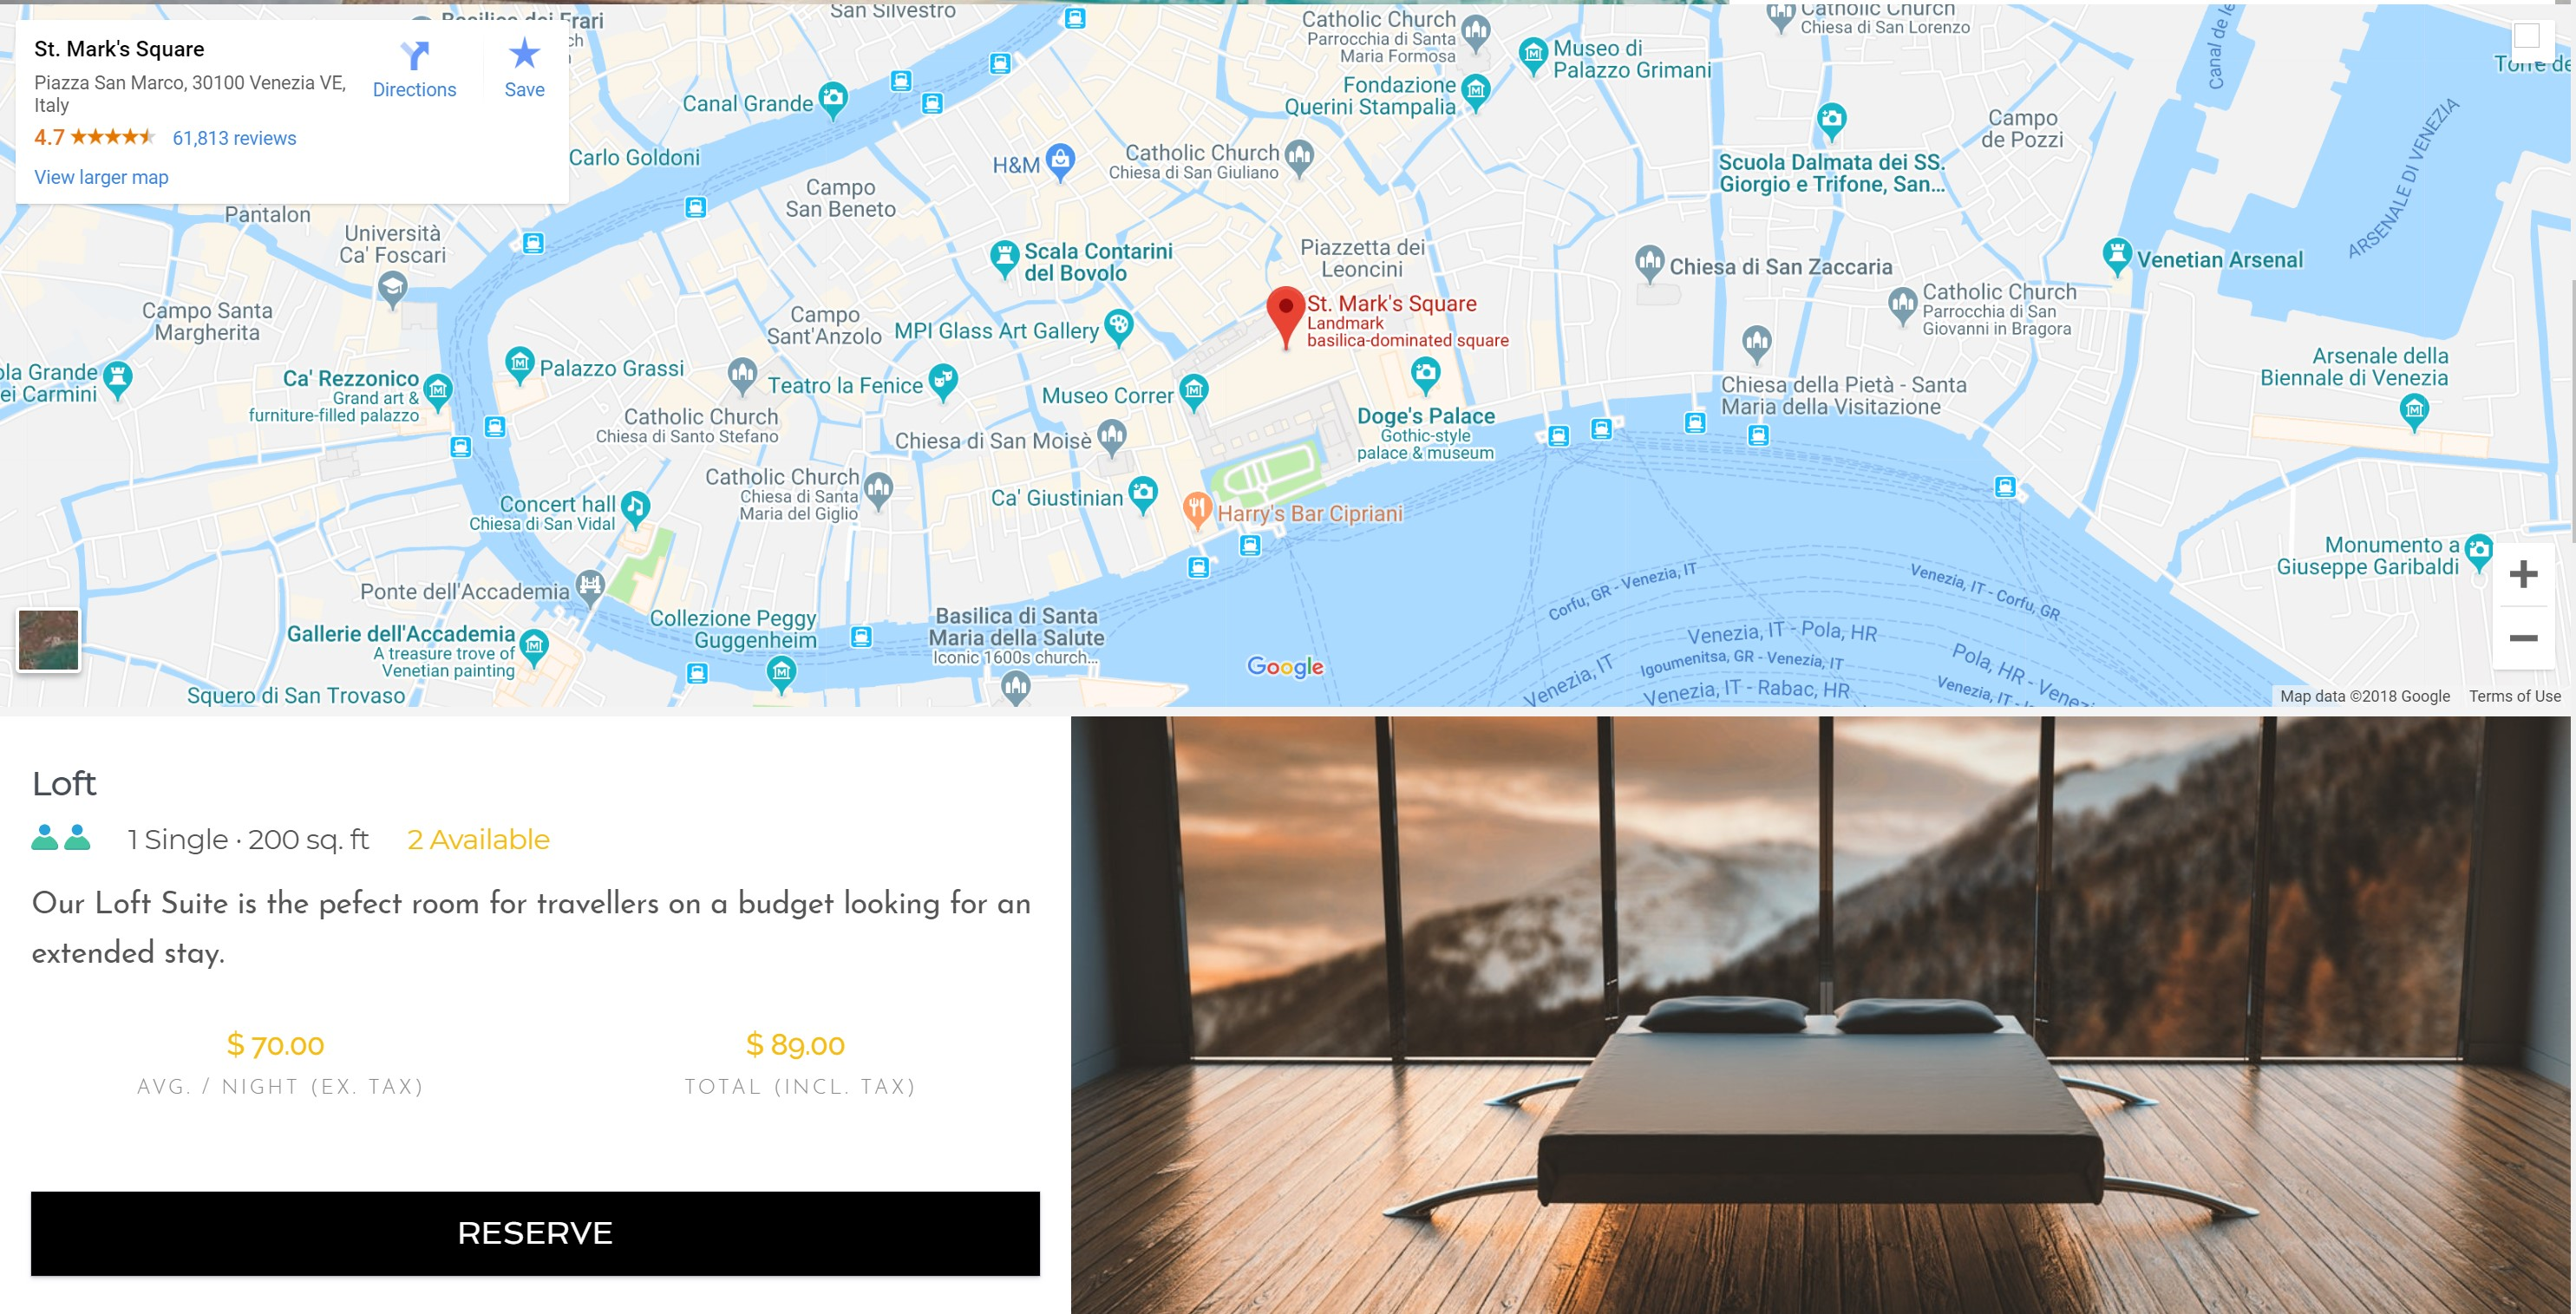 Your premium subscription to Bellebnb.com includes an embeddable booking widget, or ‘booking button’. Your guests can book rooms directly from your hotel website. Visitors don’t have to leave your website and reservations made through the booking button are commission free.